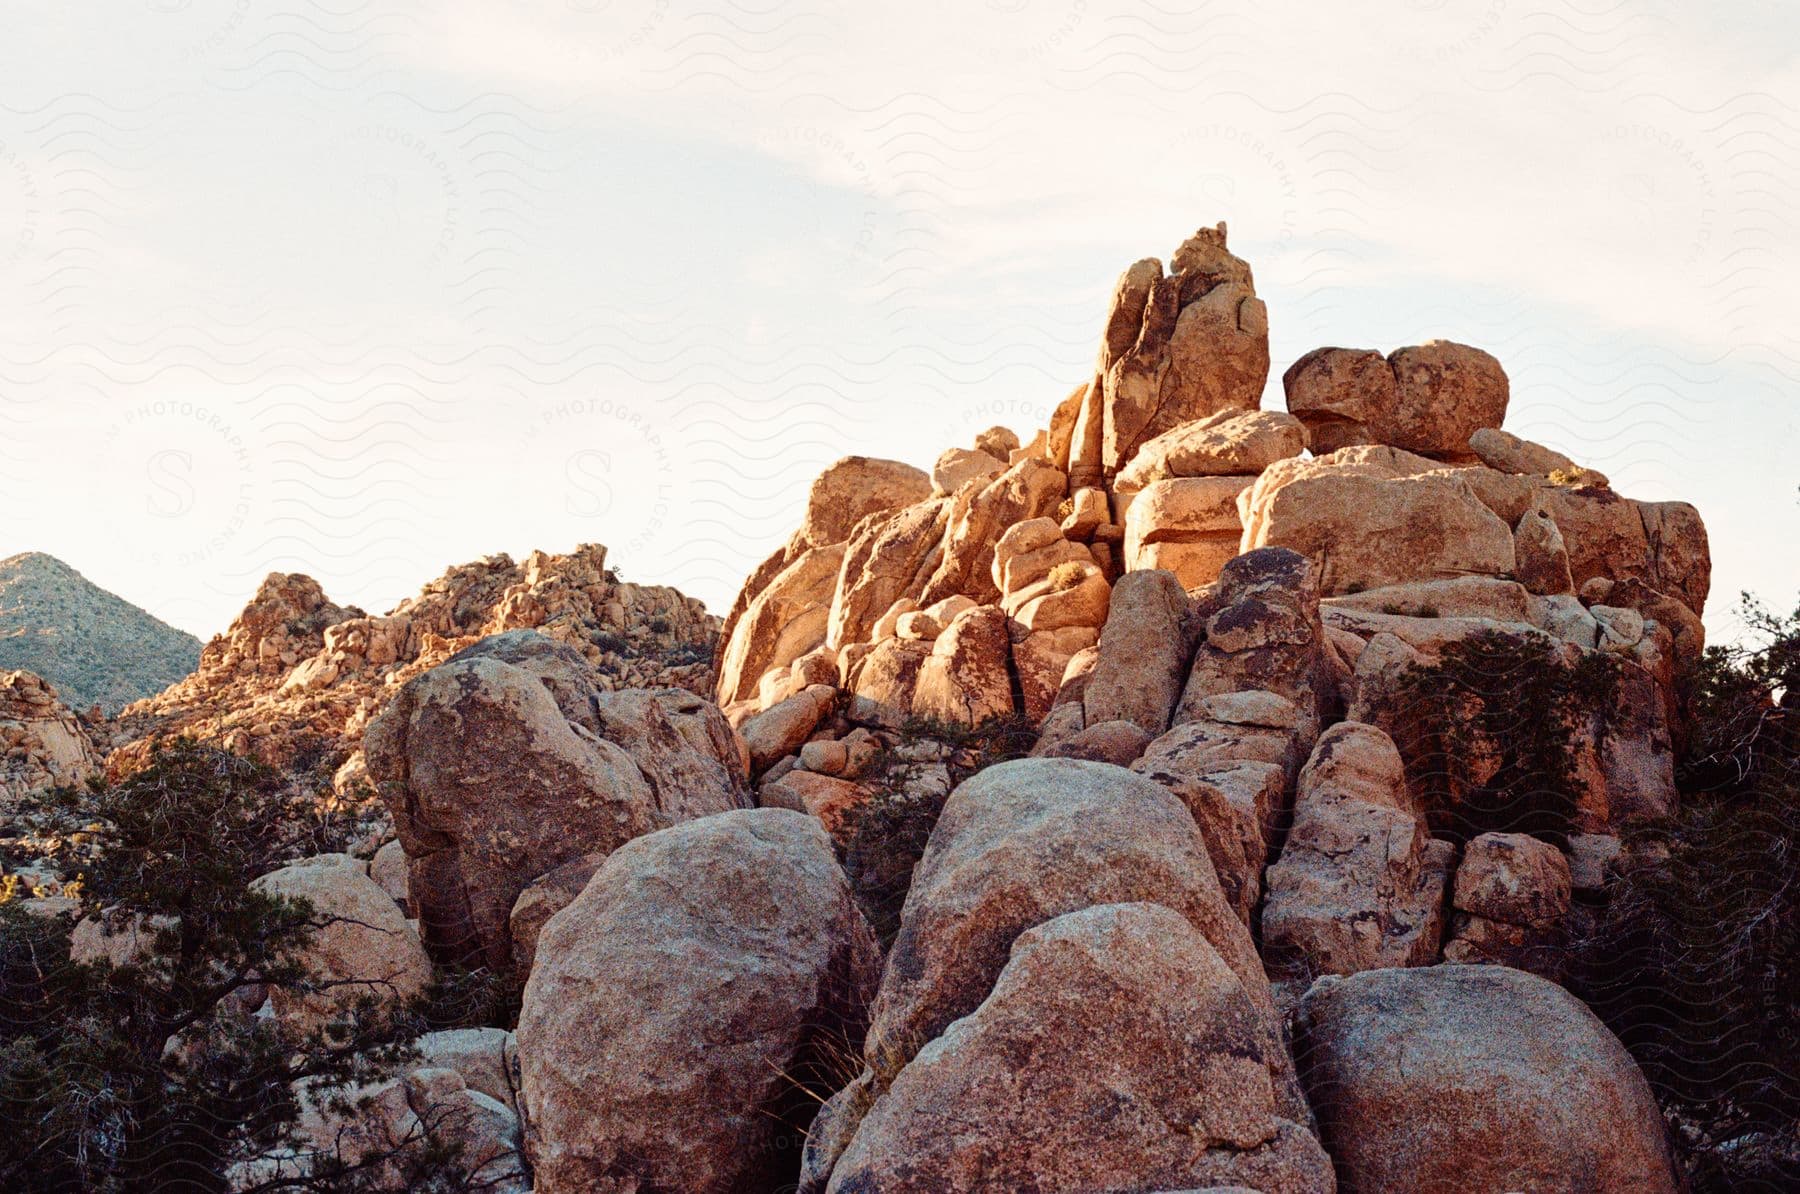 A rocky landscape bathed in warm sunlight with large boulders piled upon each other